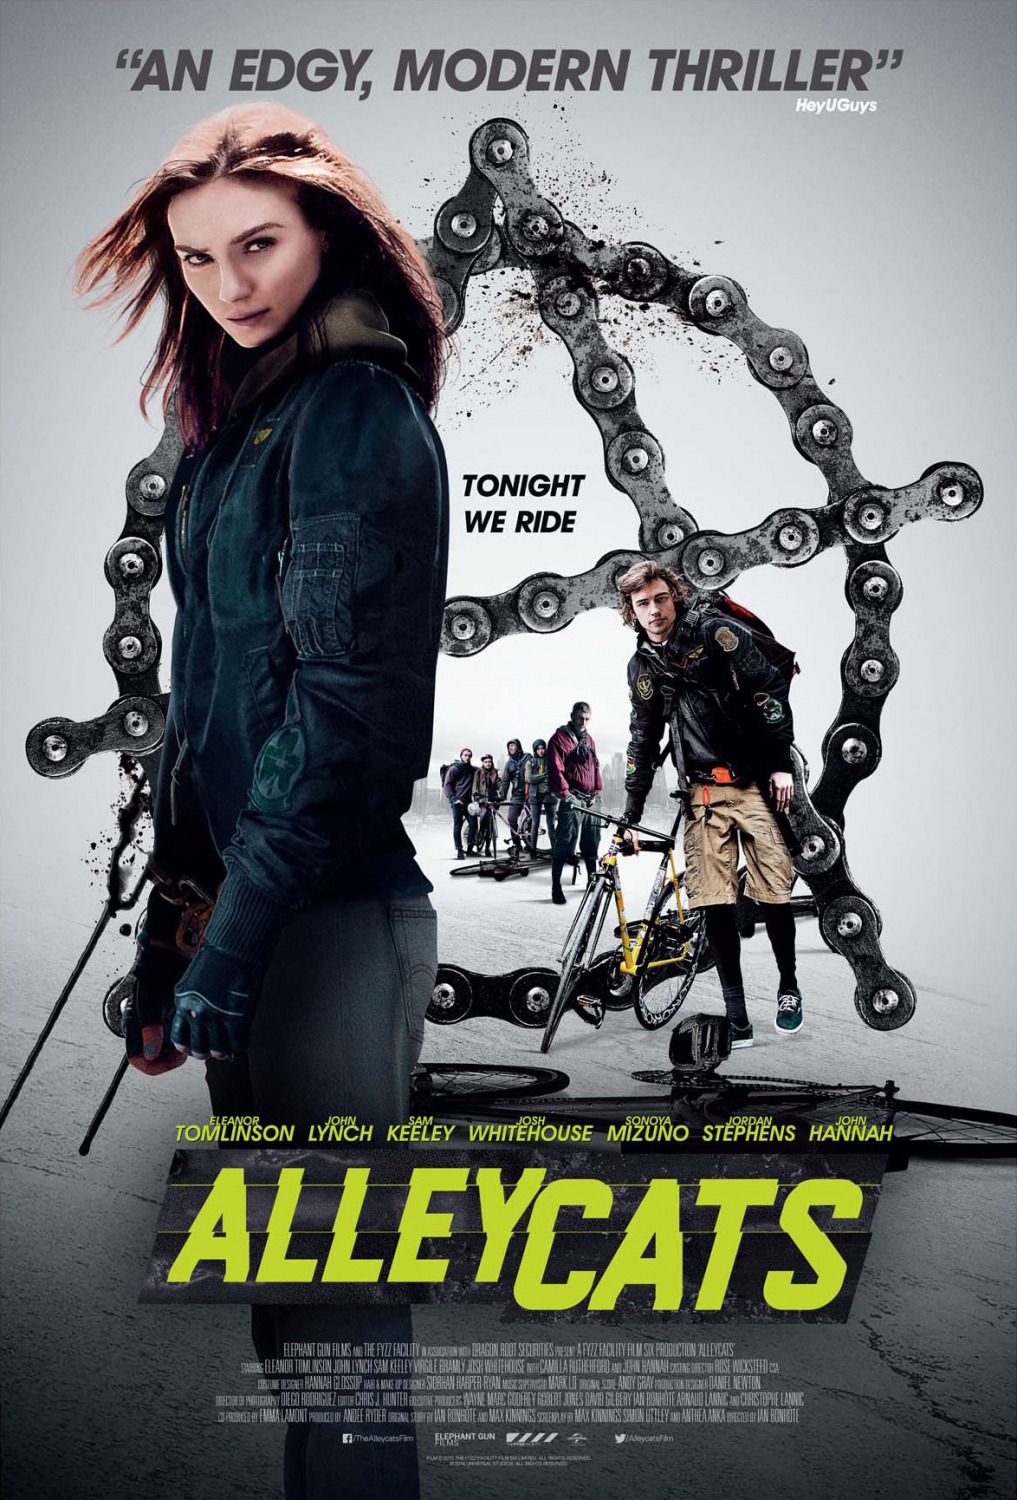 Extra Large Movie Poster Image for Alleycats 